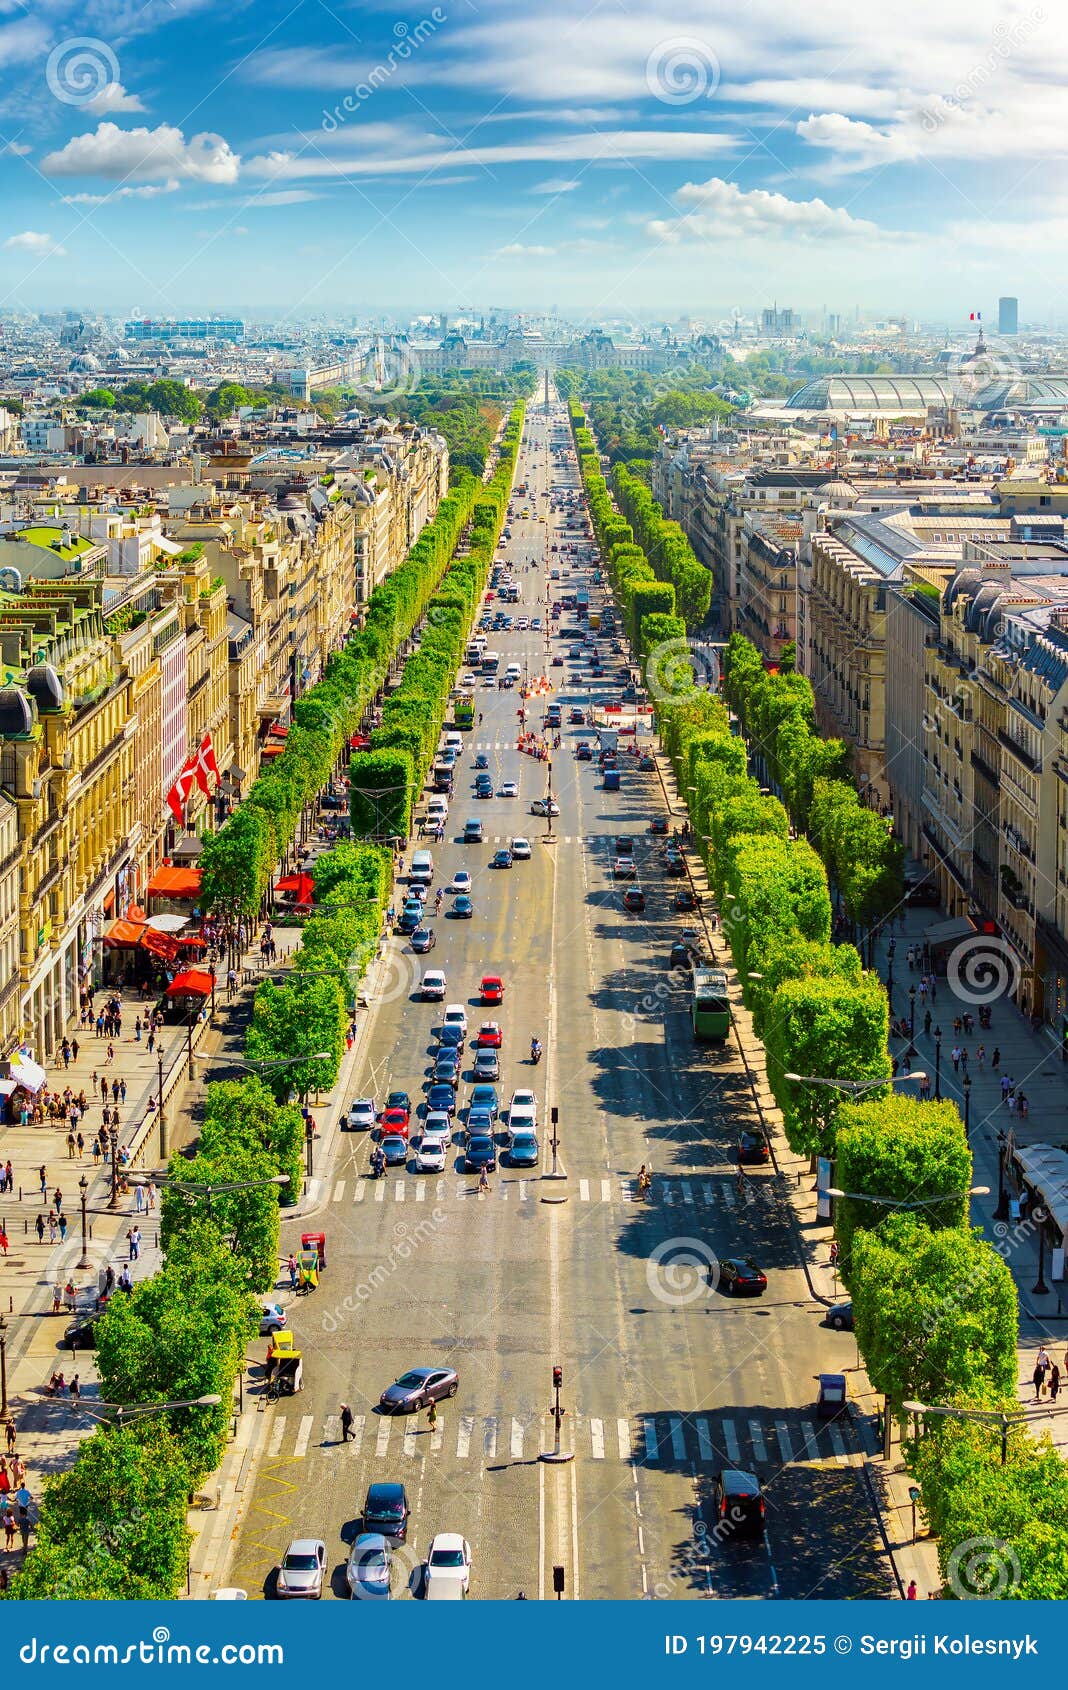 Avenue des Champs Elysees stock image. Image of road - 197942225